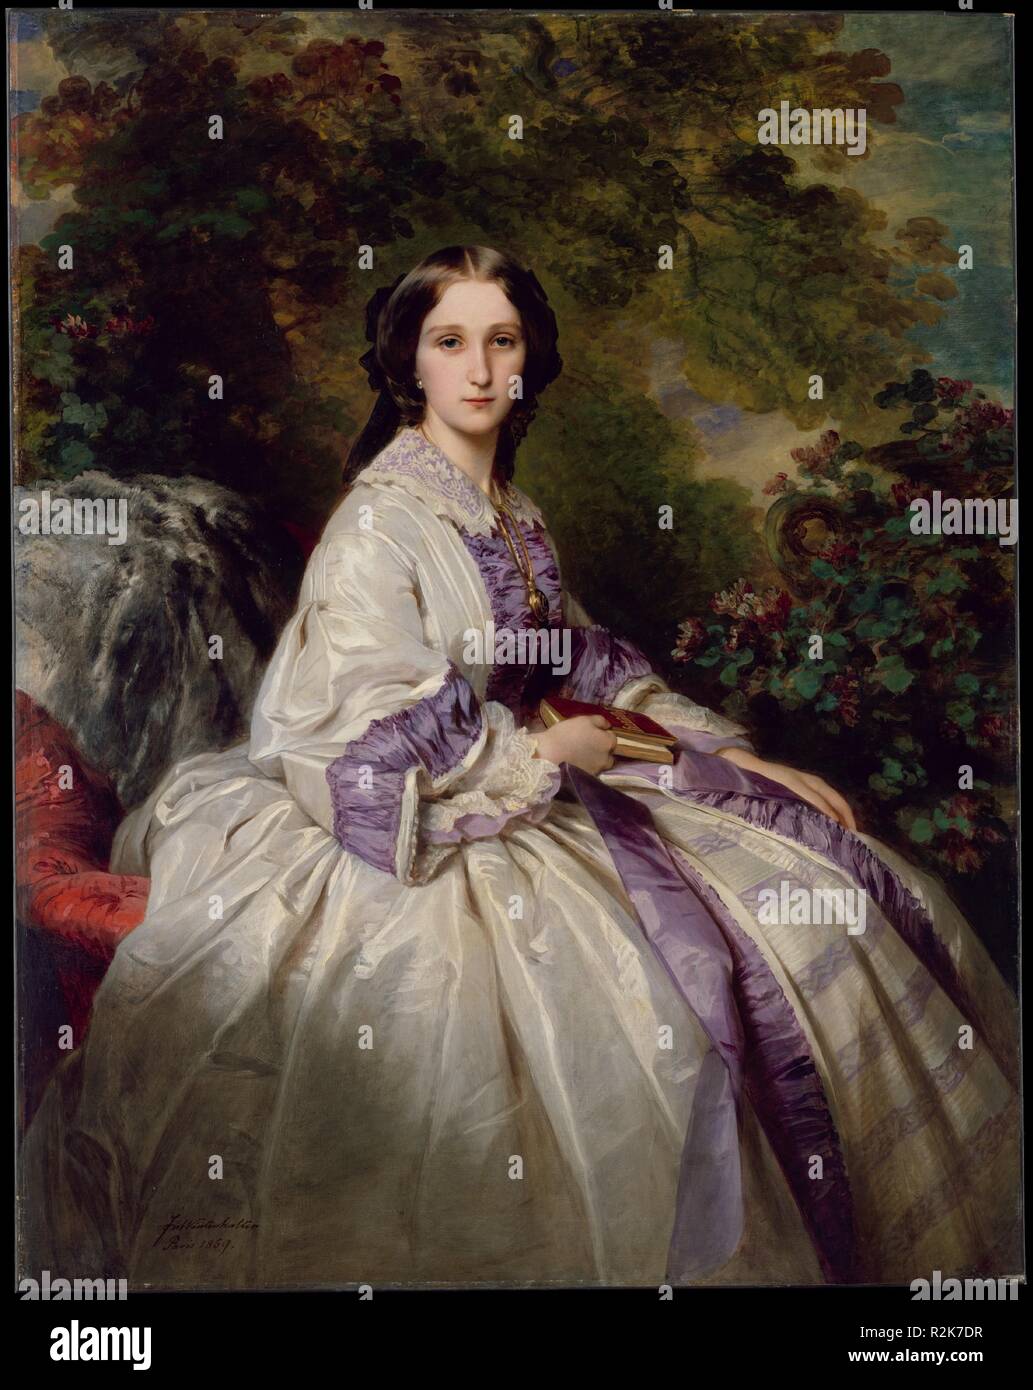 Countess Alexander Nikolaevitch Lamsdorff (Maria Ivanovna Beck, 1835-1866). Artist: Franz Xaver Winterhalter (German, Menzenschwand 1805-1873 Frankfurt). Dimensions: 57 1/4 x 45 1/4 in. (145.4 x 114.9 cm). Date: 1859.  Although trained in Germany, Winterhalter spent most of his adult life in Paris, where he became a favorite portraitist of European aristocrats. In 1841 alone, his sitters included the king and queen of Belgium; King Louis-Philippe of France; and Queen Maria Cristina of Spain. The following year, he added Marie-Amélie, queen of France, and Queen Victoria and Prince Albert of Eng Stock Photo